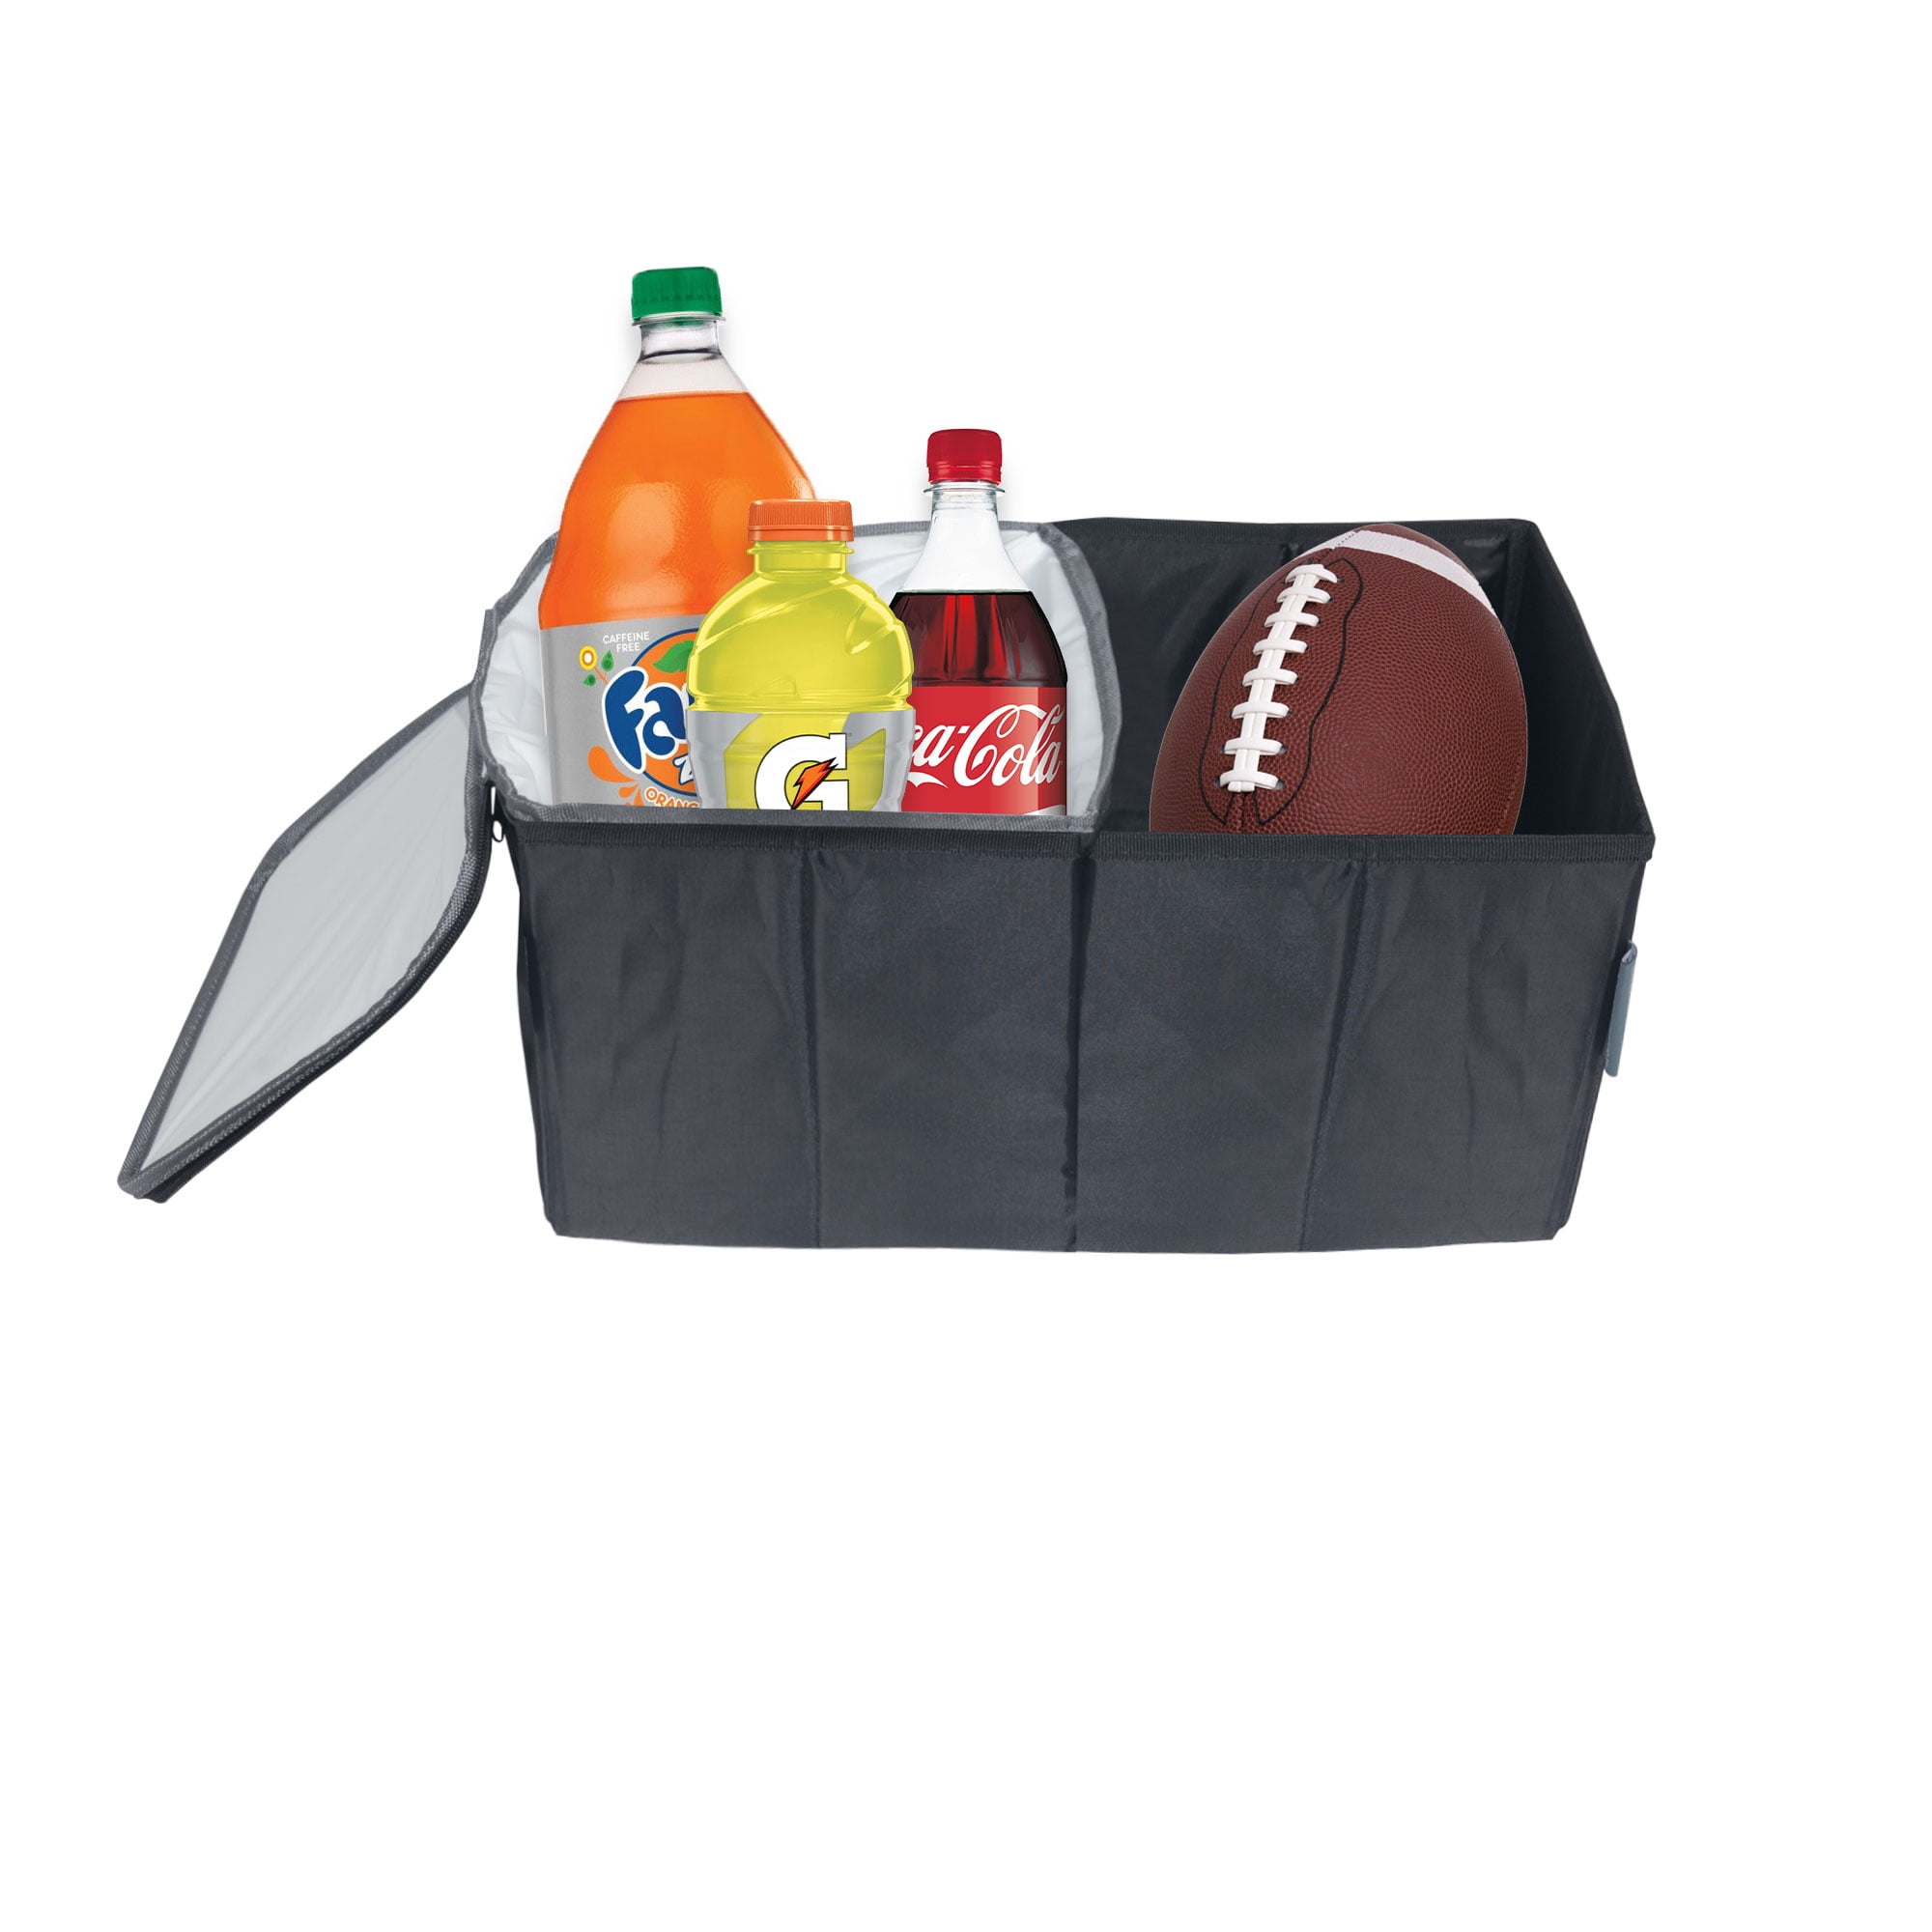 Dual Purpose Trunk Organizer with Cooler